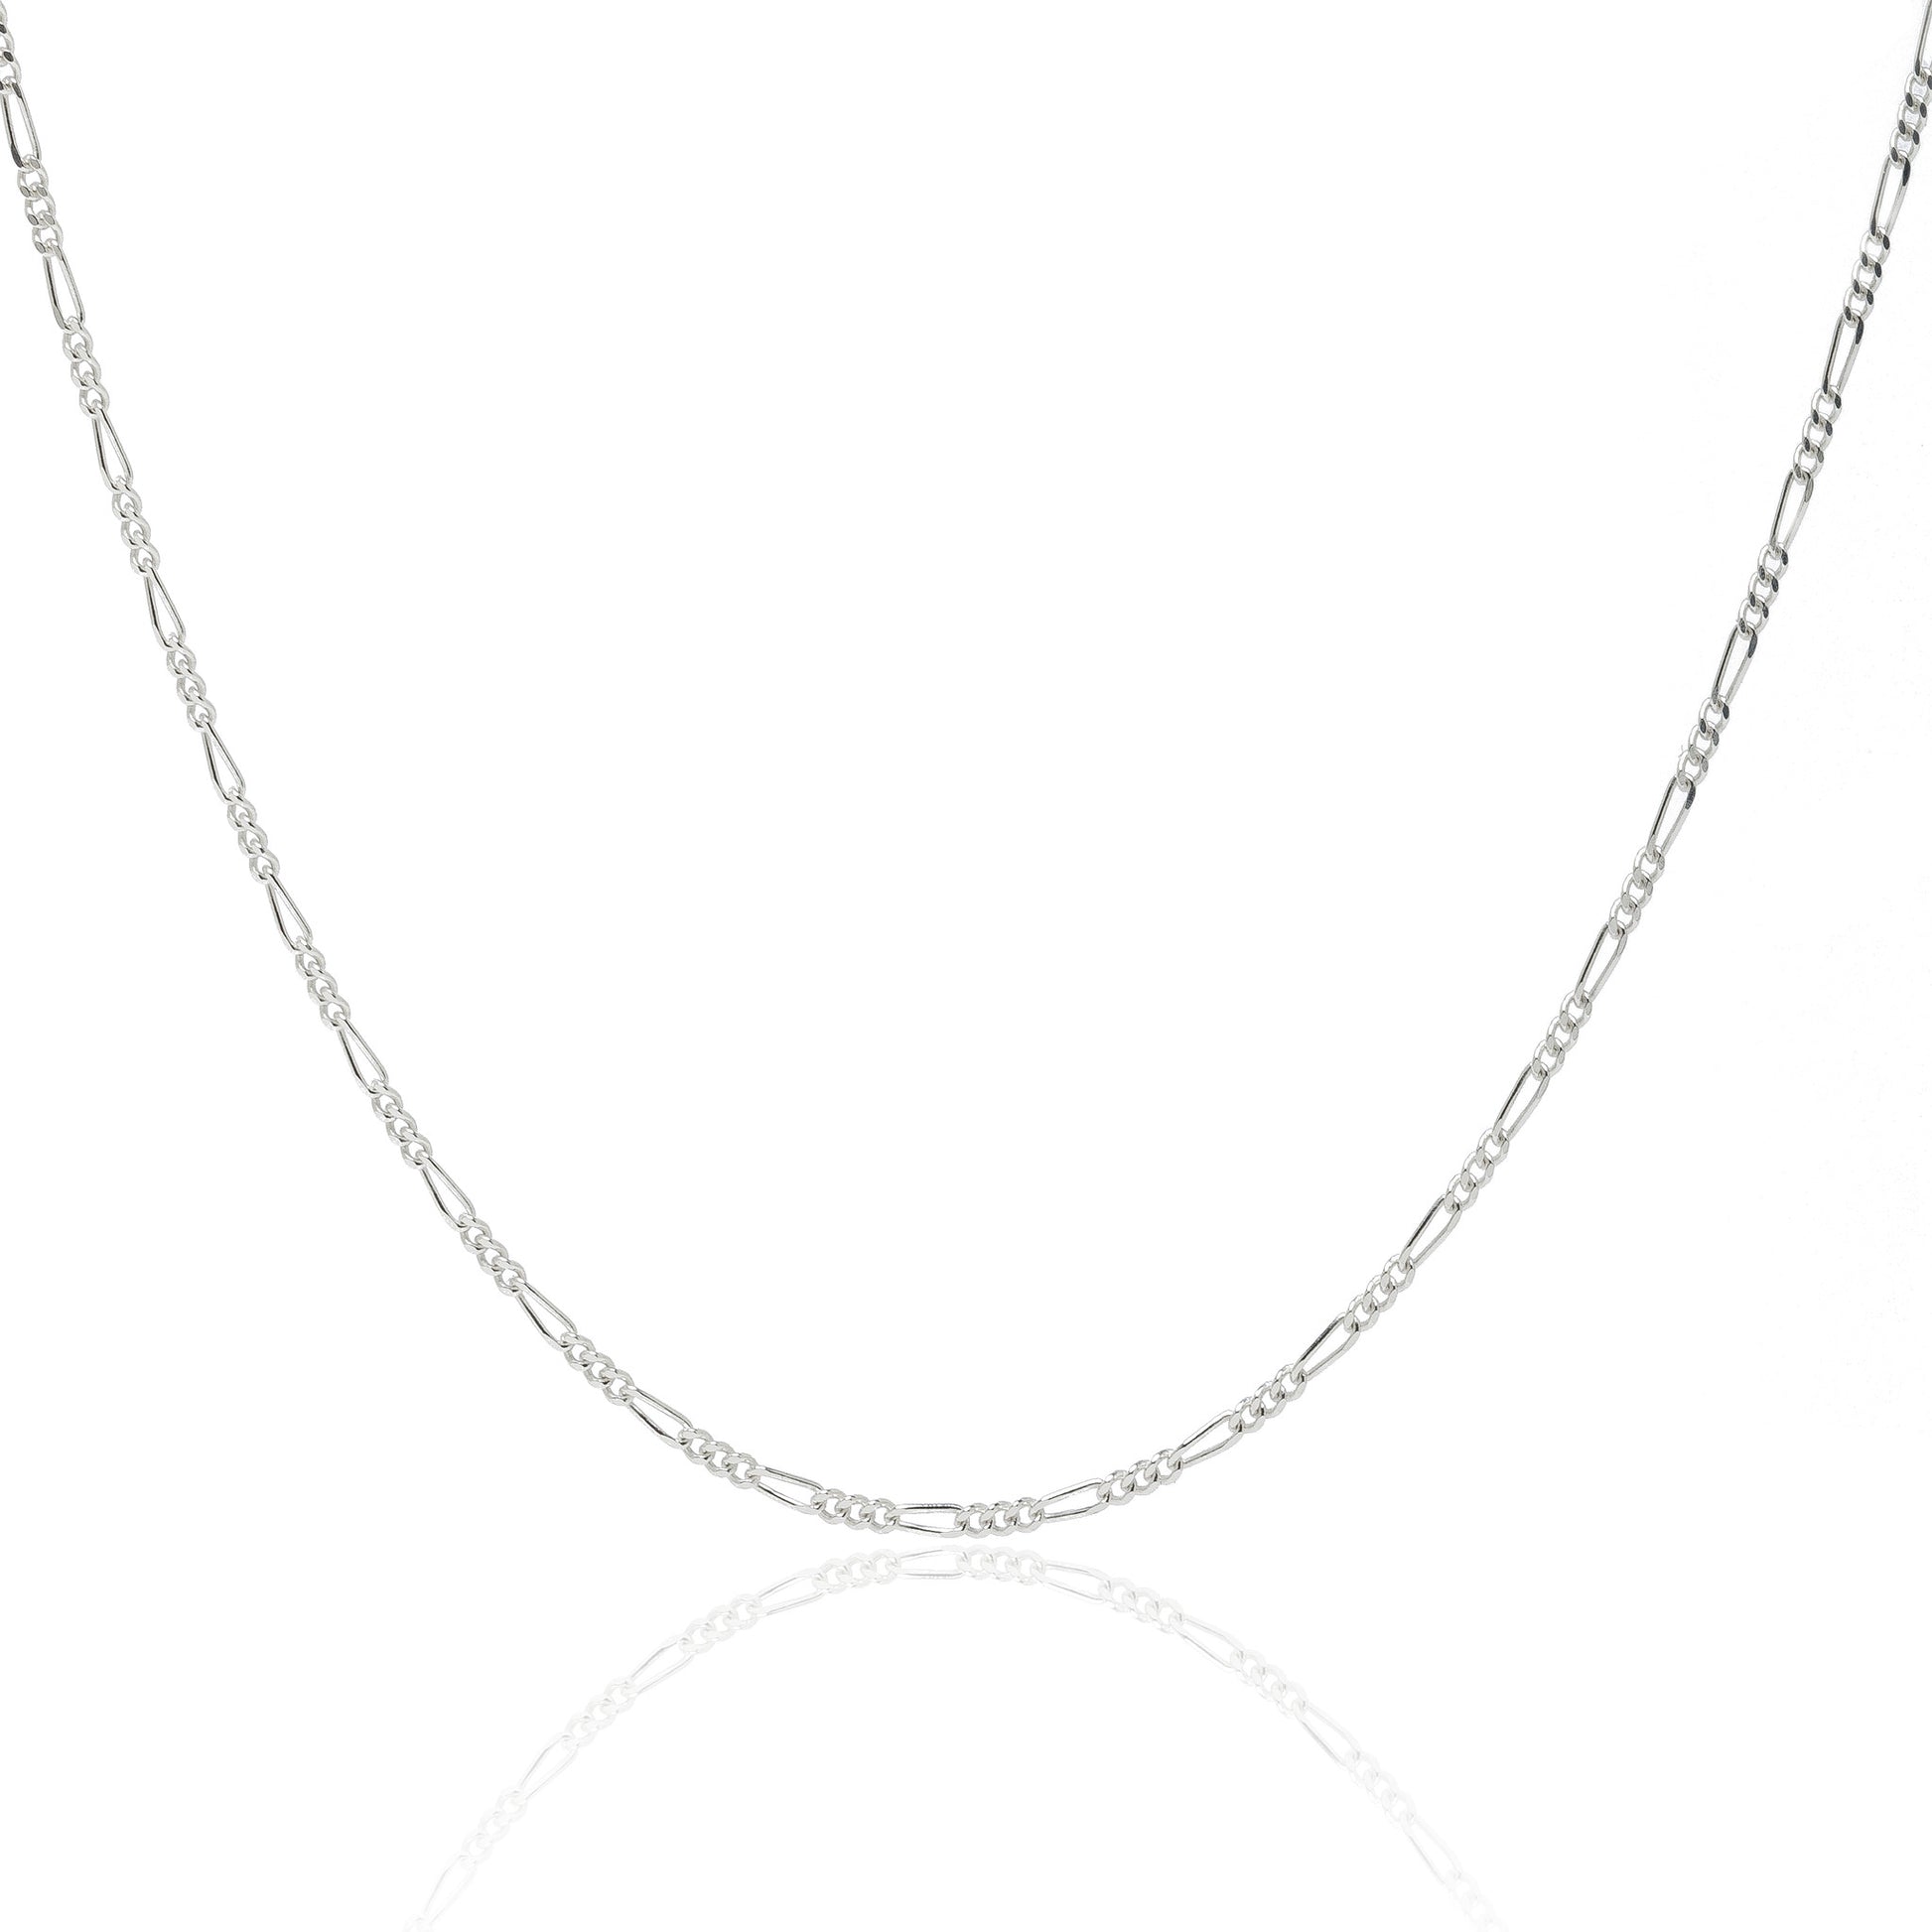 1.8MM Sterling Silver Figaro Chain For Men and Women. Perfect for pendants.